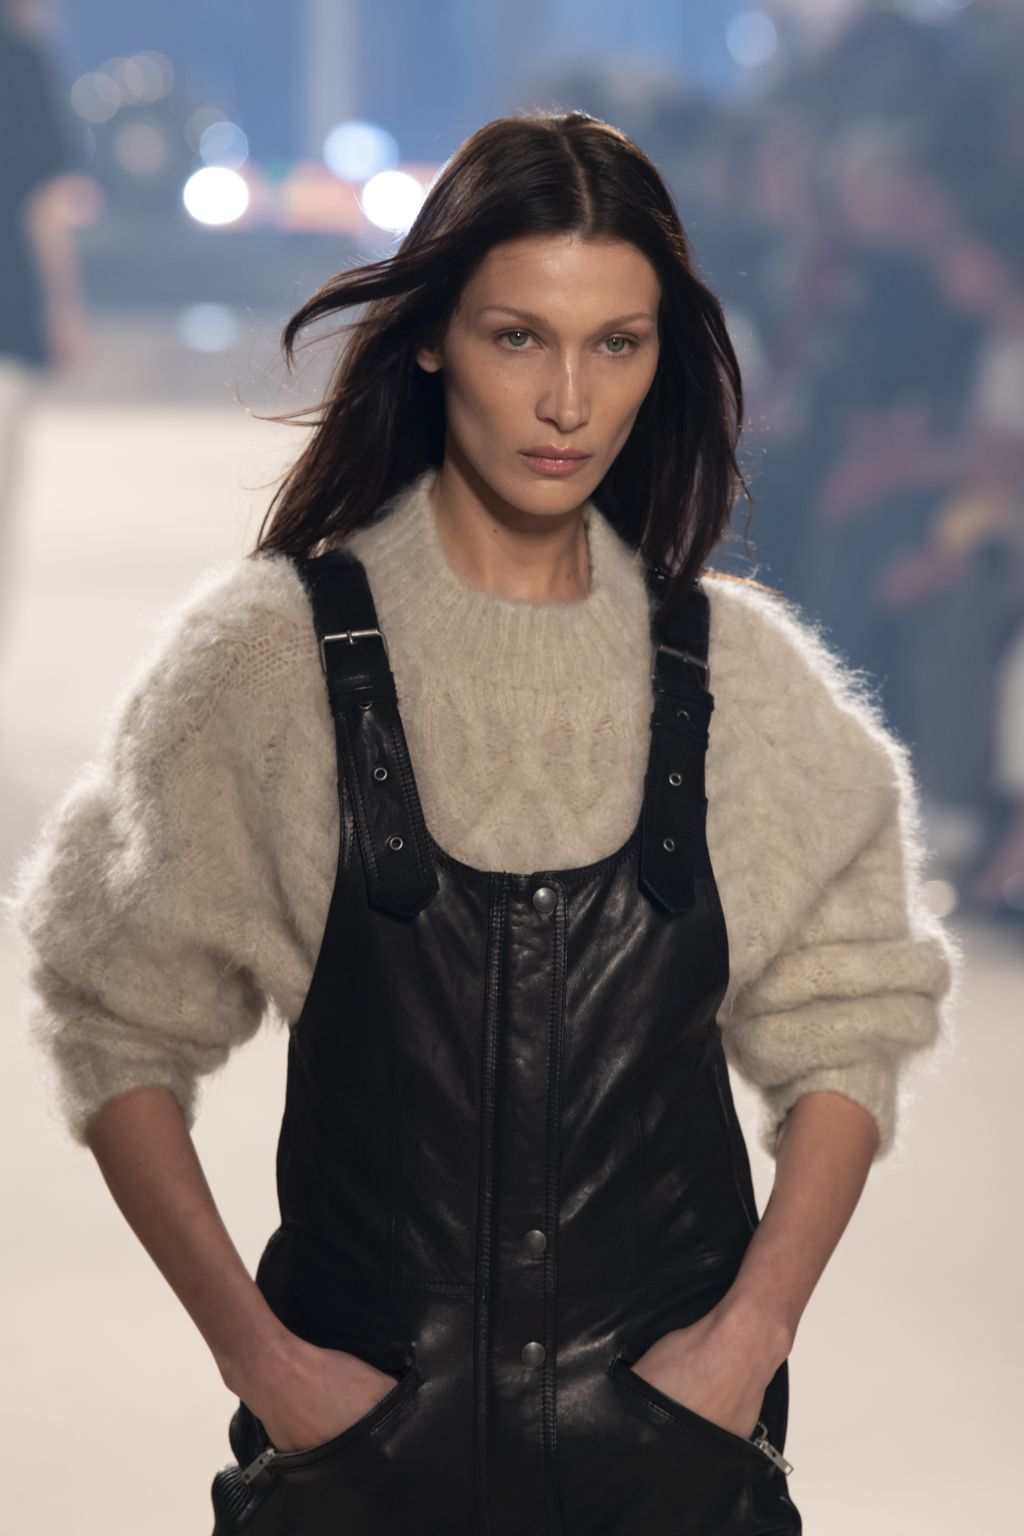 PARIS, FRANCE - MARCH 03: (EDITORIAL USE ONLY - For Non-Editorial use please seek approval from Fashion House) Bella Hadid walks the runway with models during the Isabel Marant  Womenswear Fall/Winter 2022-2023 show as part of Paris Fashion Week on March 03, 2022 in Paris, France. (Photo by Kristy Sparow/Getty Images)